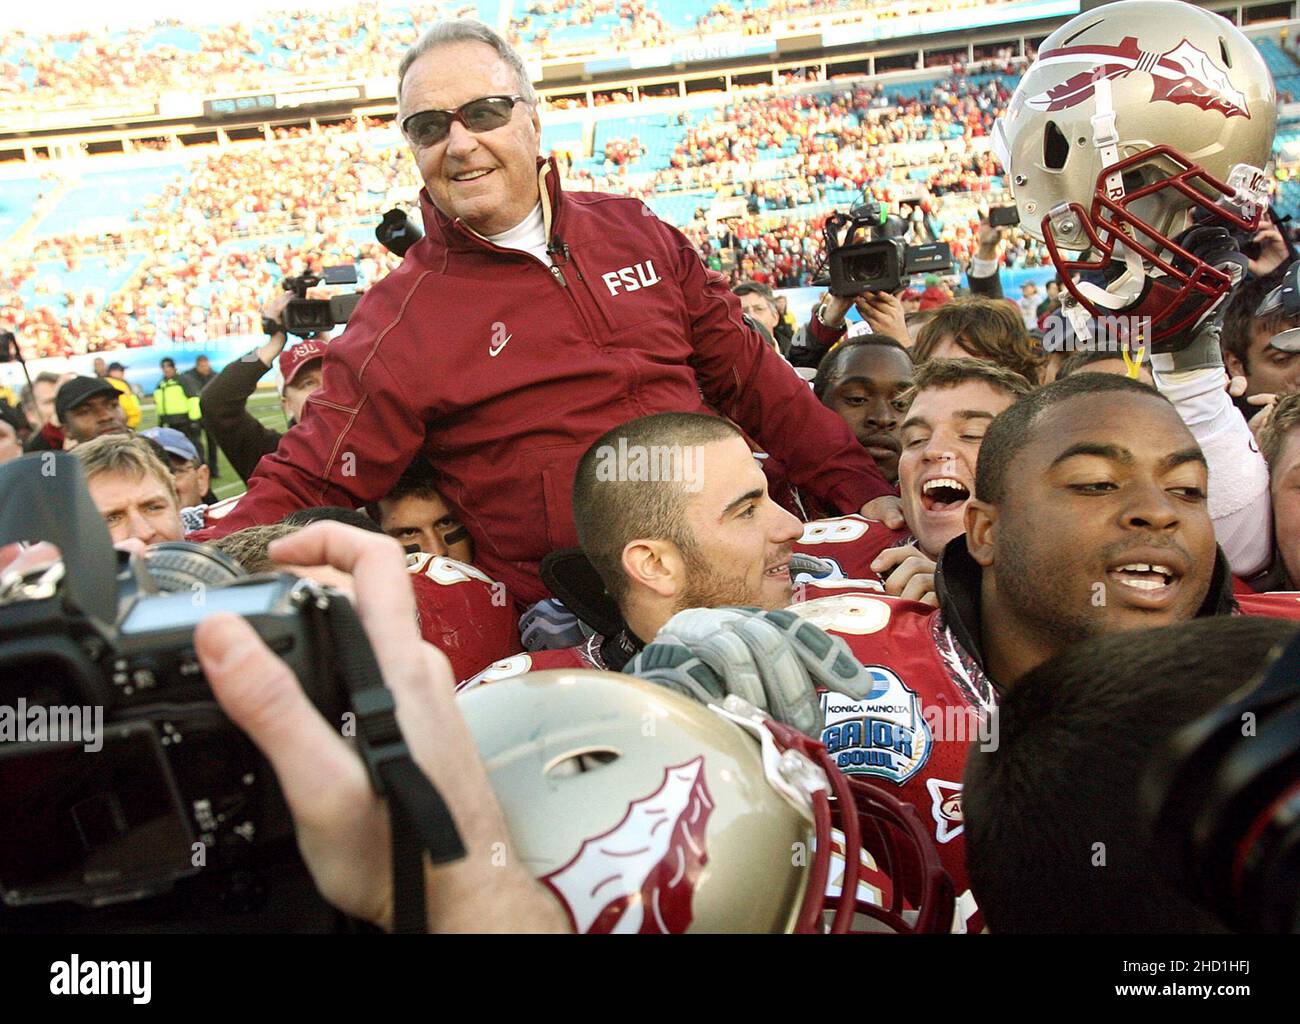 Florida State head coach Bobby Bowden is carried triumphantly on the shoulders of his players after beating West Virginia, 33-21, in the Gator Bowl at Jacksonville Municipal Stadium in Jacksonville, Florida, Friday, January 1, 2010. (Photo by Stephen M. Dowell/Orlando Sentinel/TNS/Sipa USA) Stock Photo